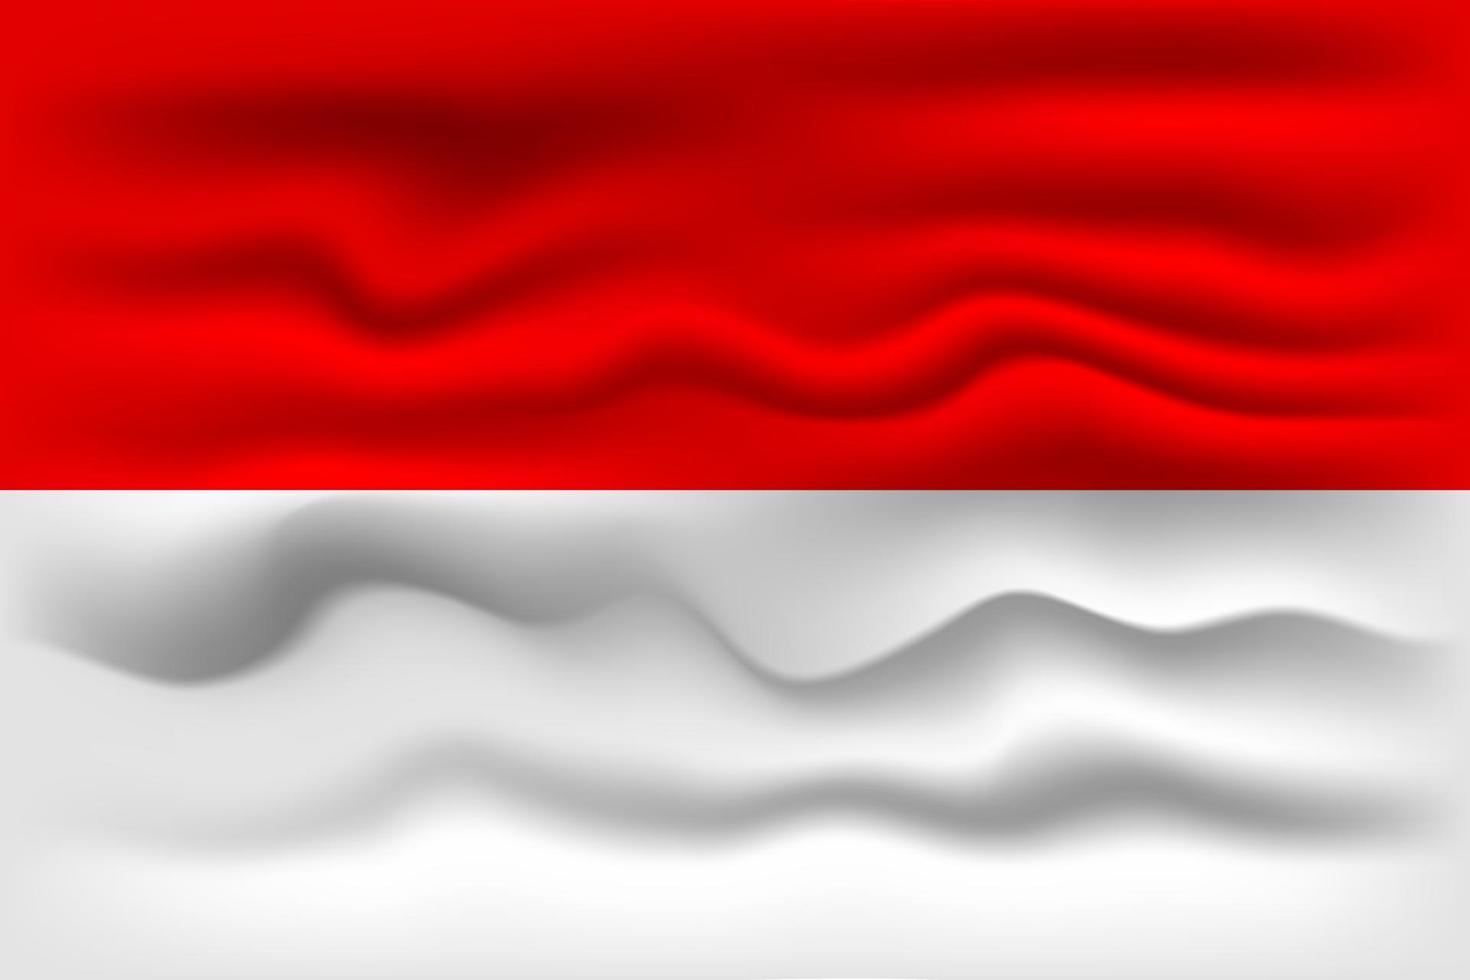 Waving flag of the country Indonesia. Vector illustration.